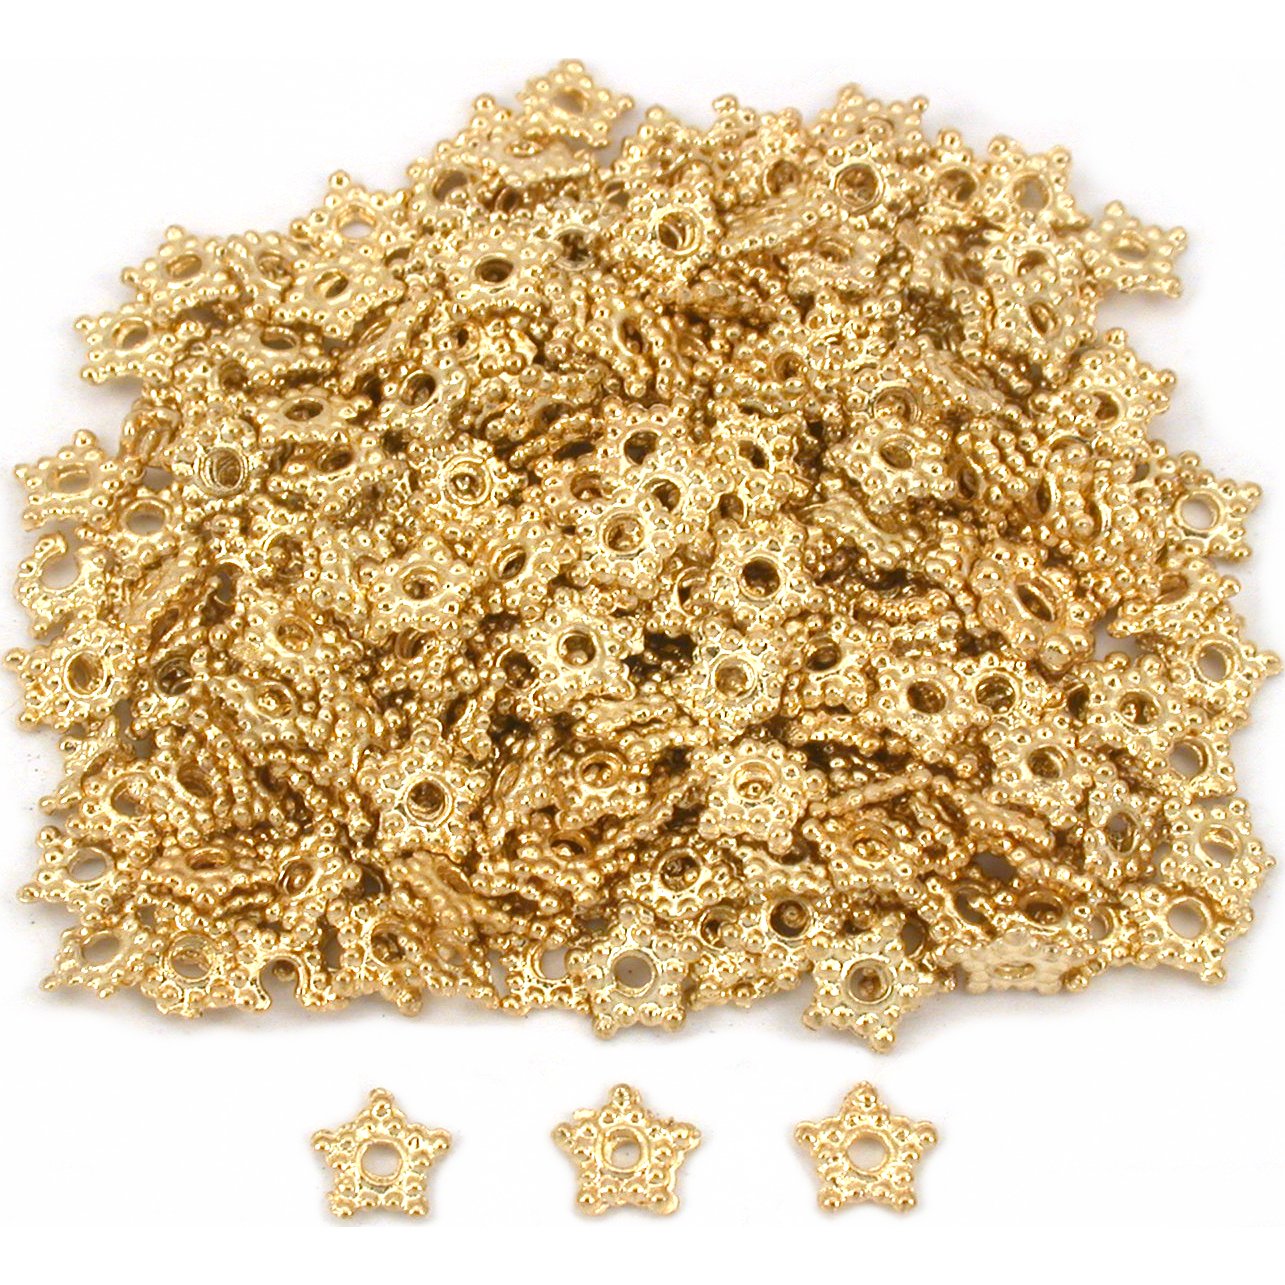 Bali Spacer Star Gold Plated Beads 5mm 160Pcs Approx.